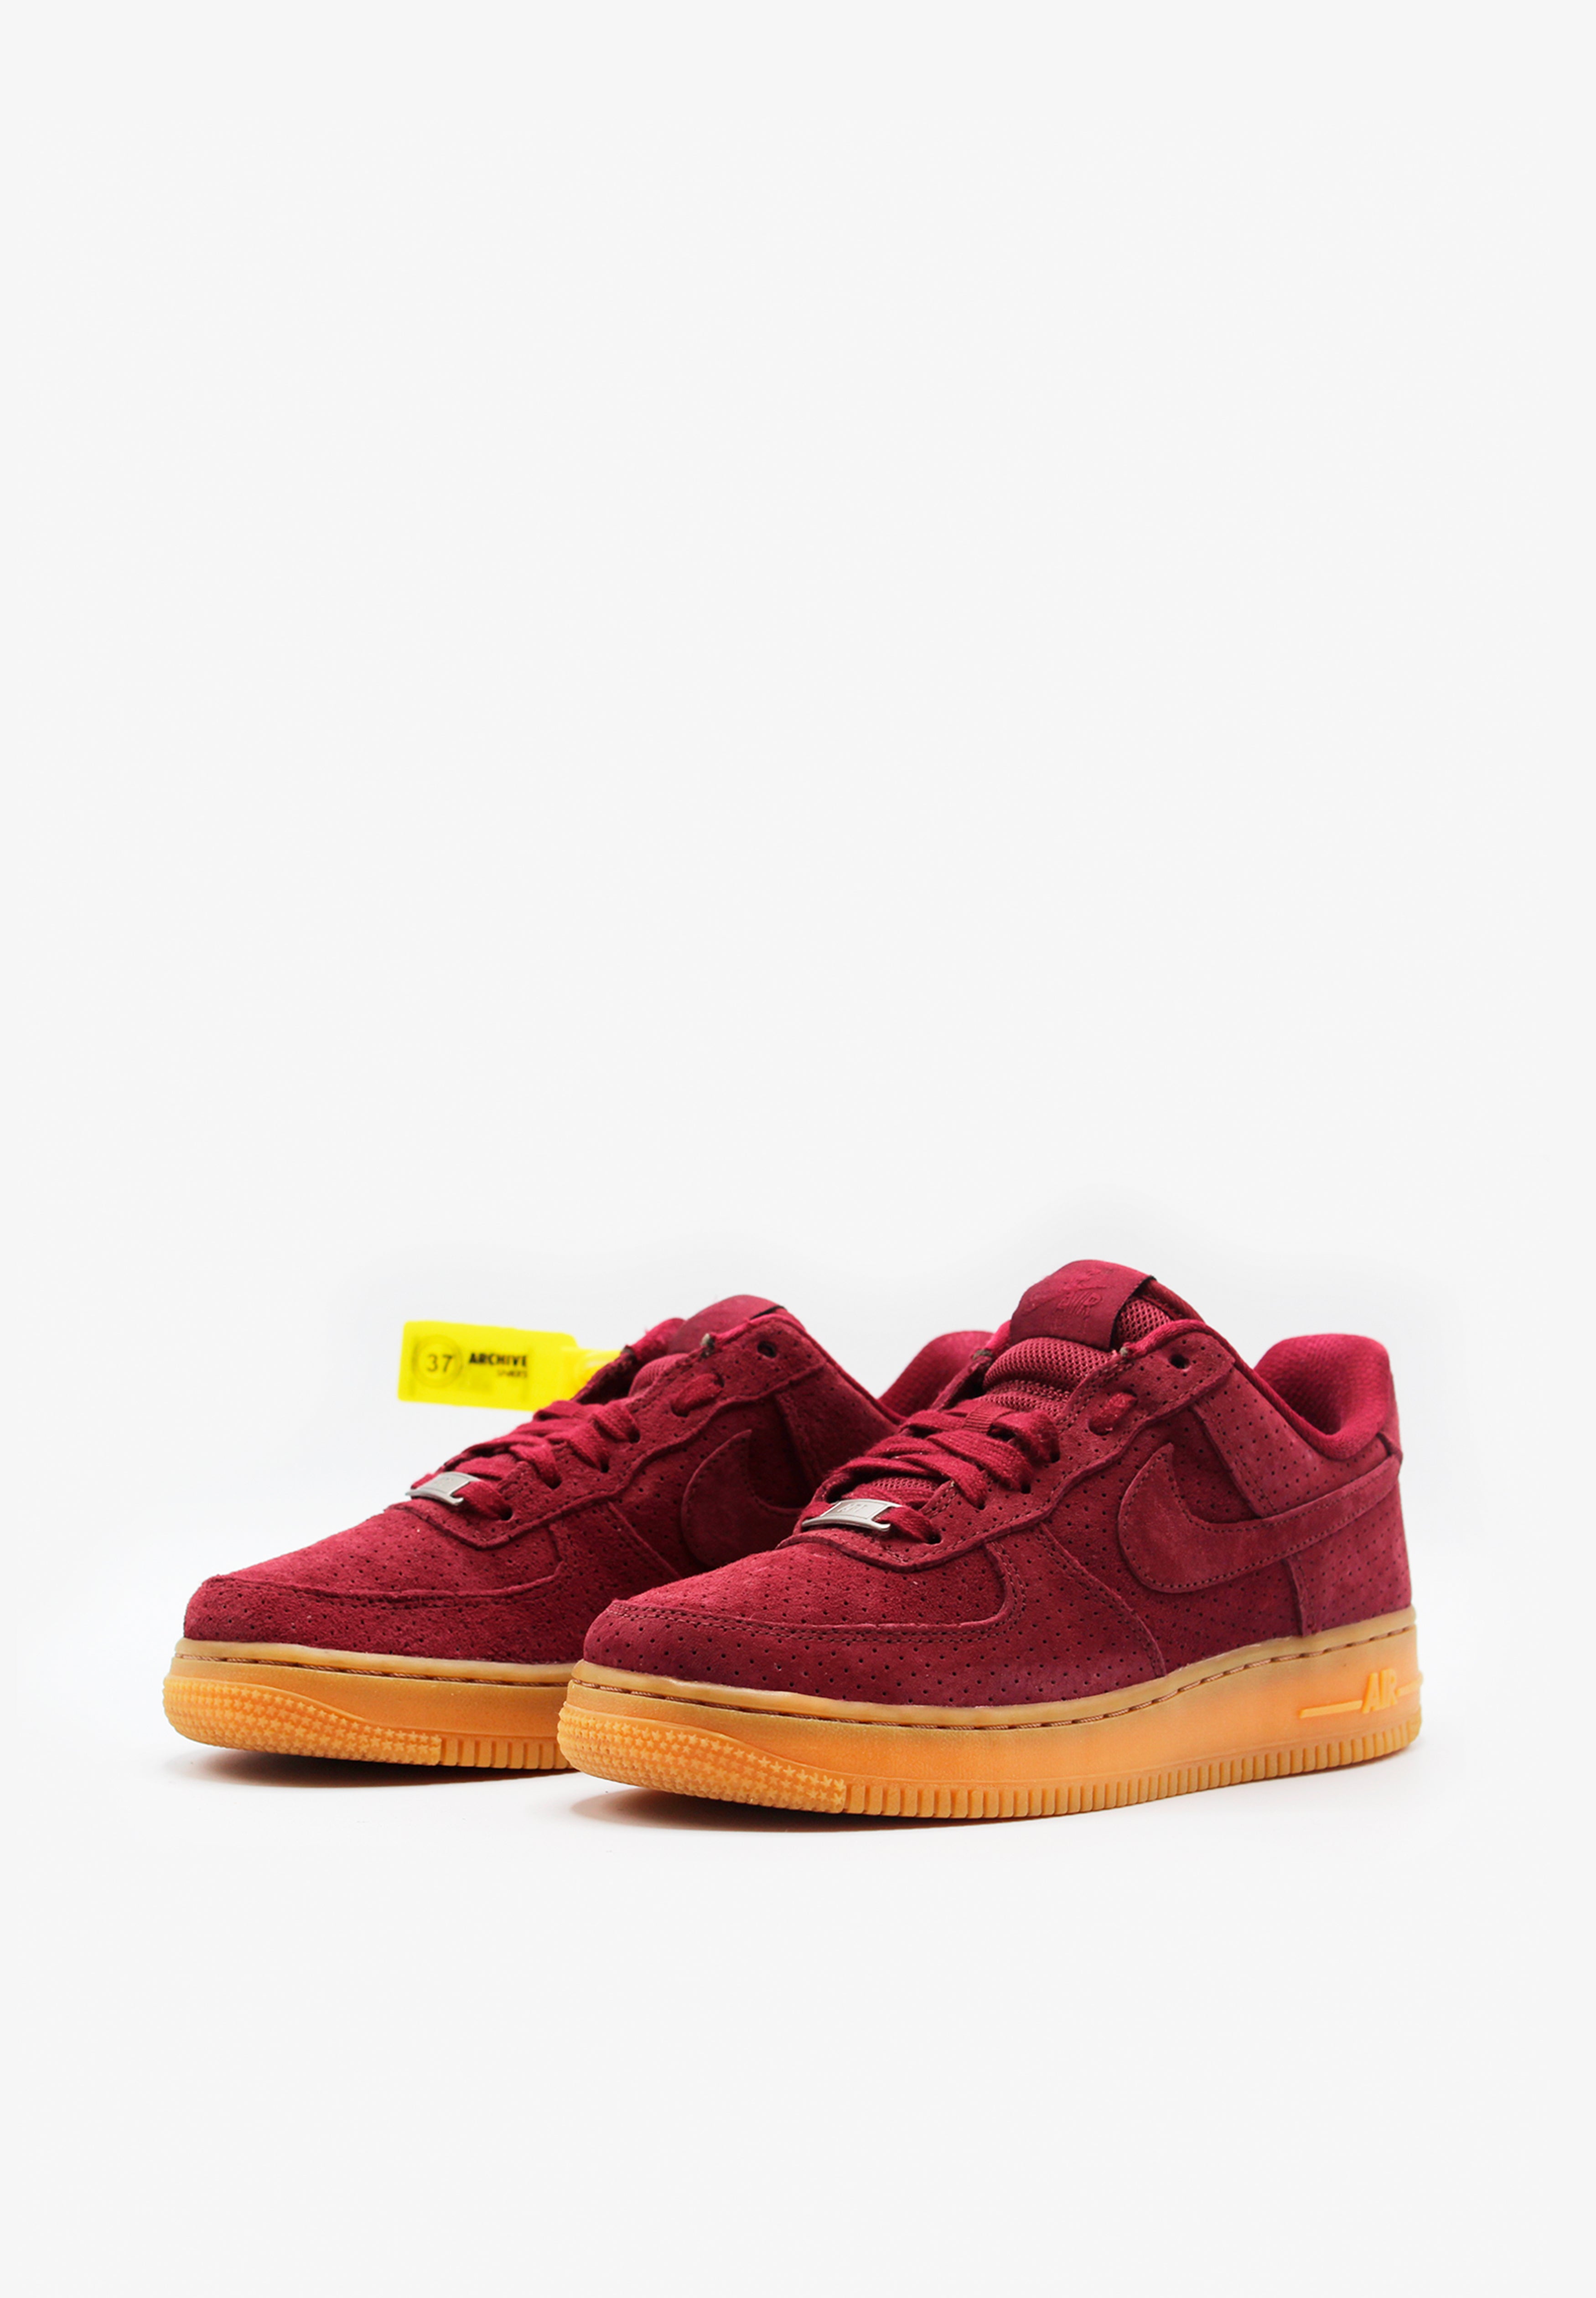 ARCHIVE SNEAKRS | SNEAKERS NIKE AIR FORCE 1 ´07 TALLA 37.5